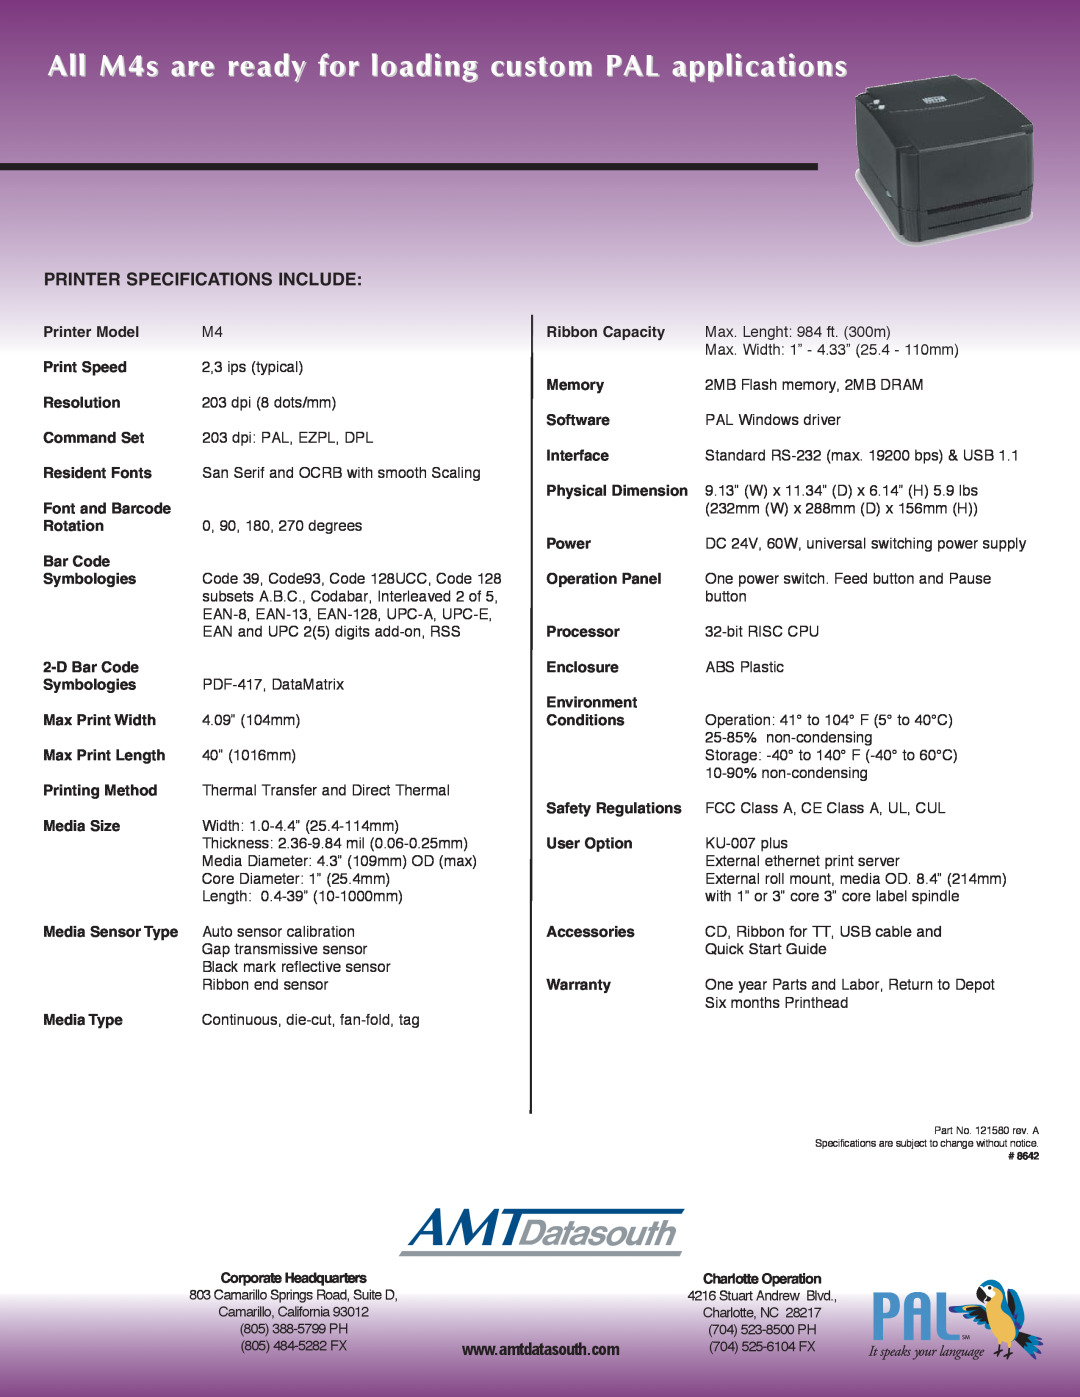 AMT Datasouth M4 Series manual All M4s are ready for loading custom PAL applications, Printer Specifications Include 